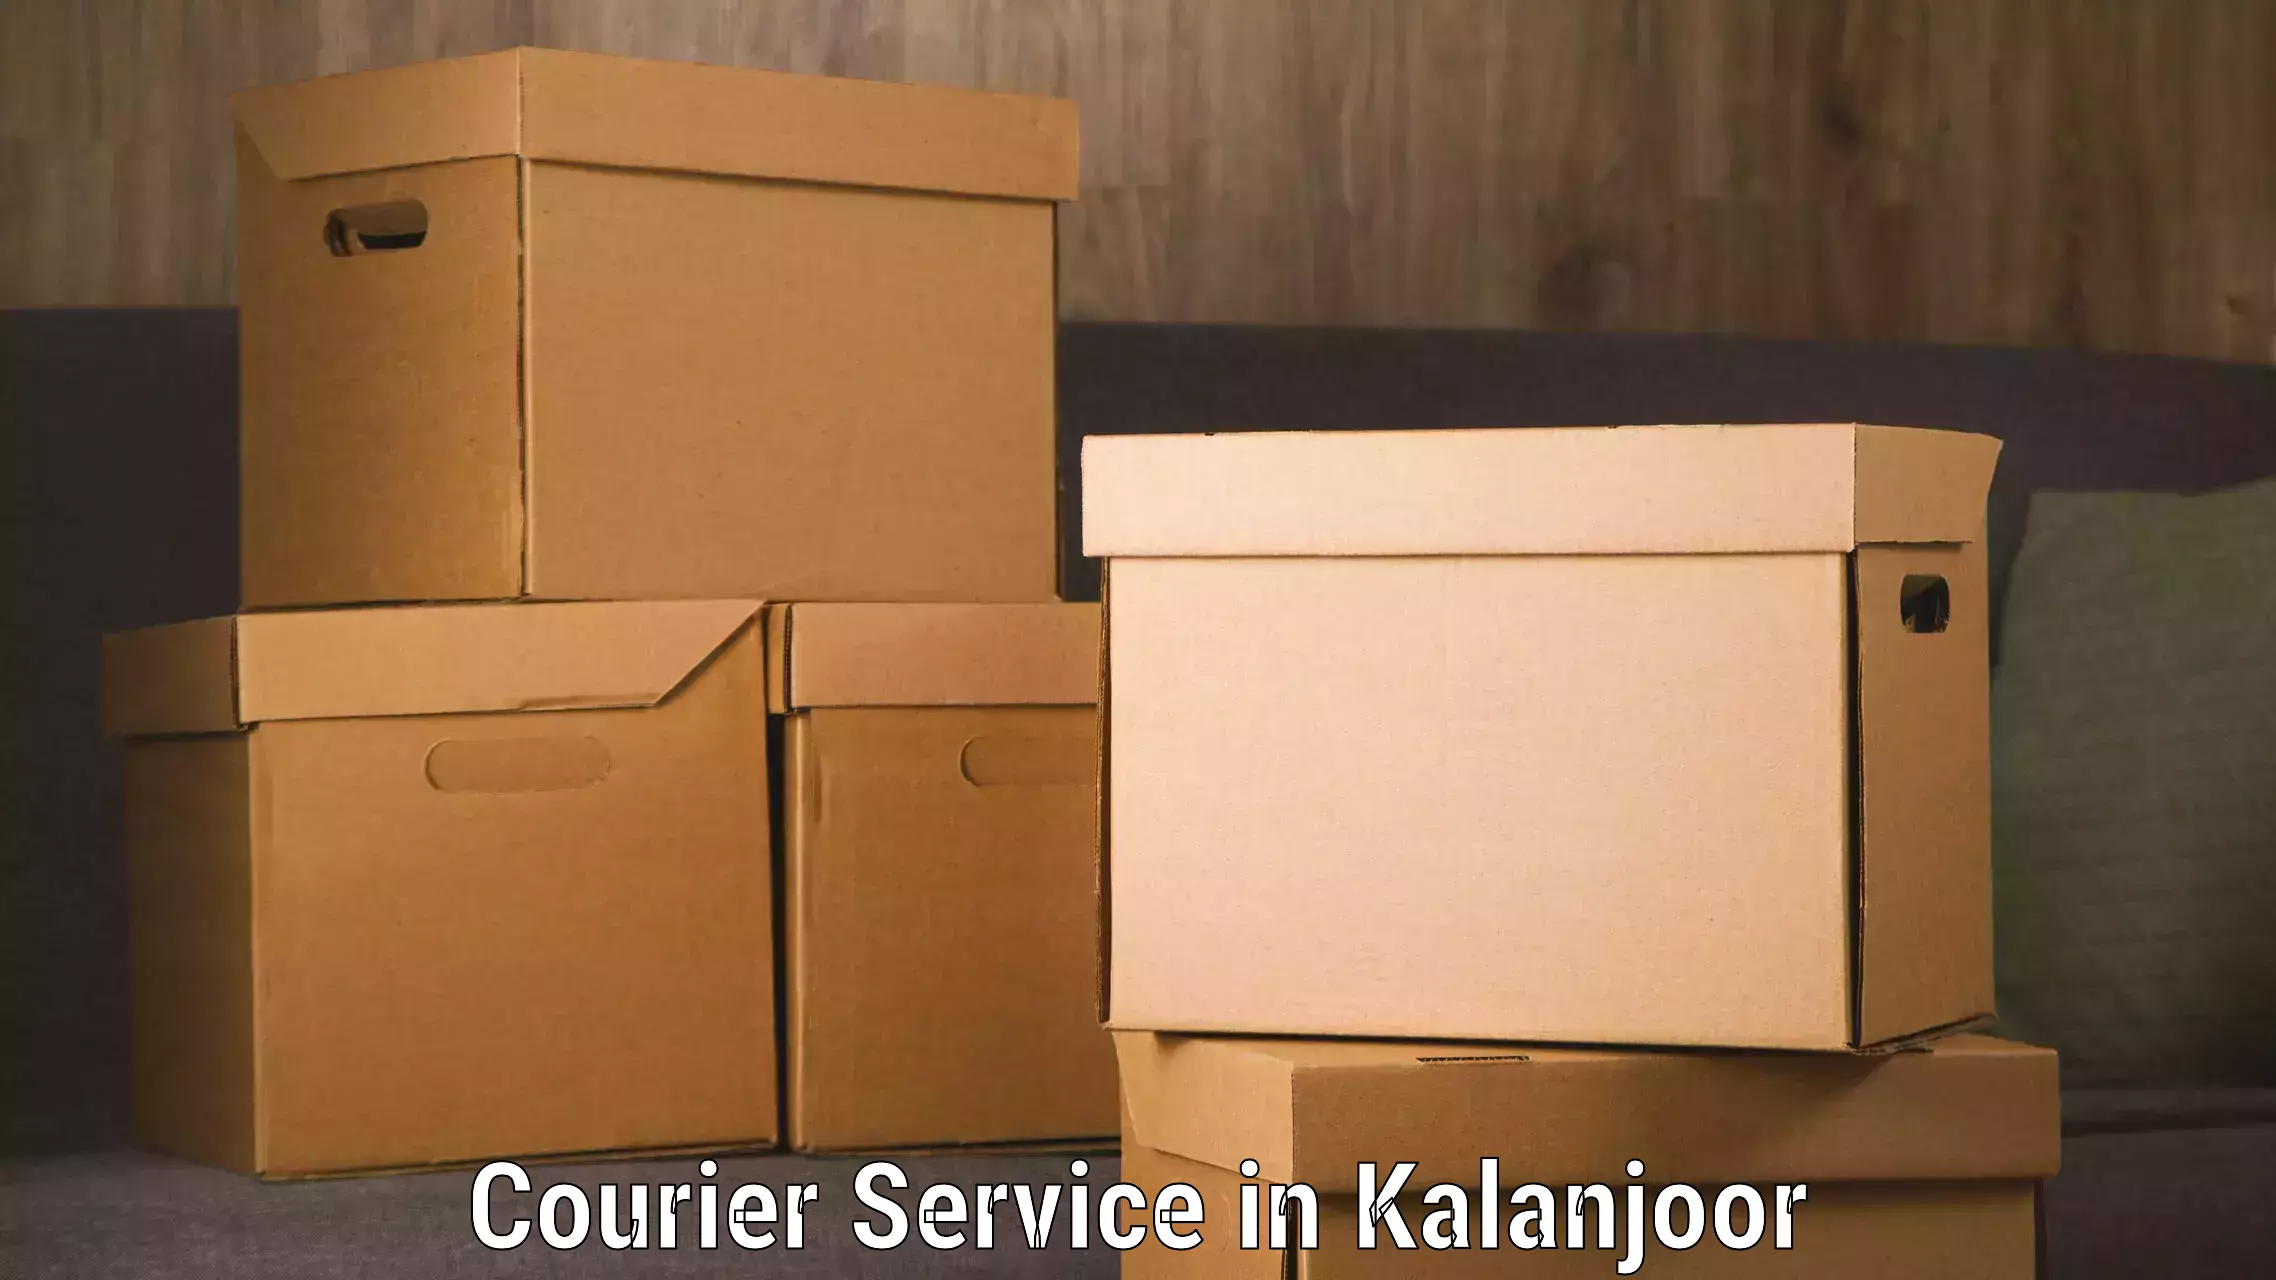 Advanced package delivery in Kalanjoor